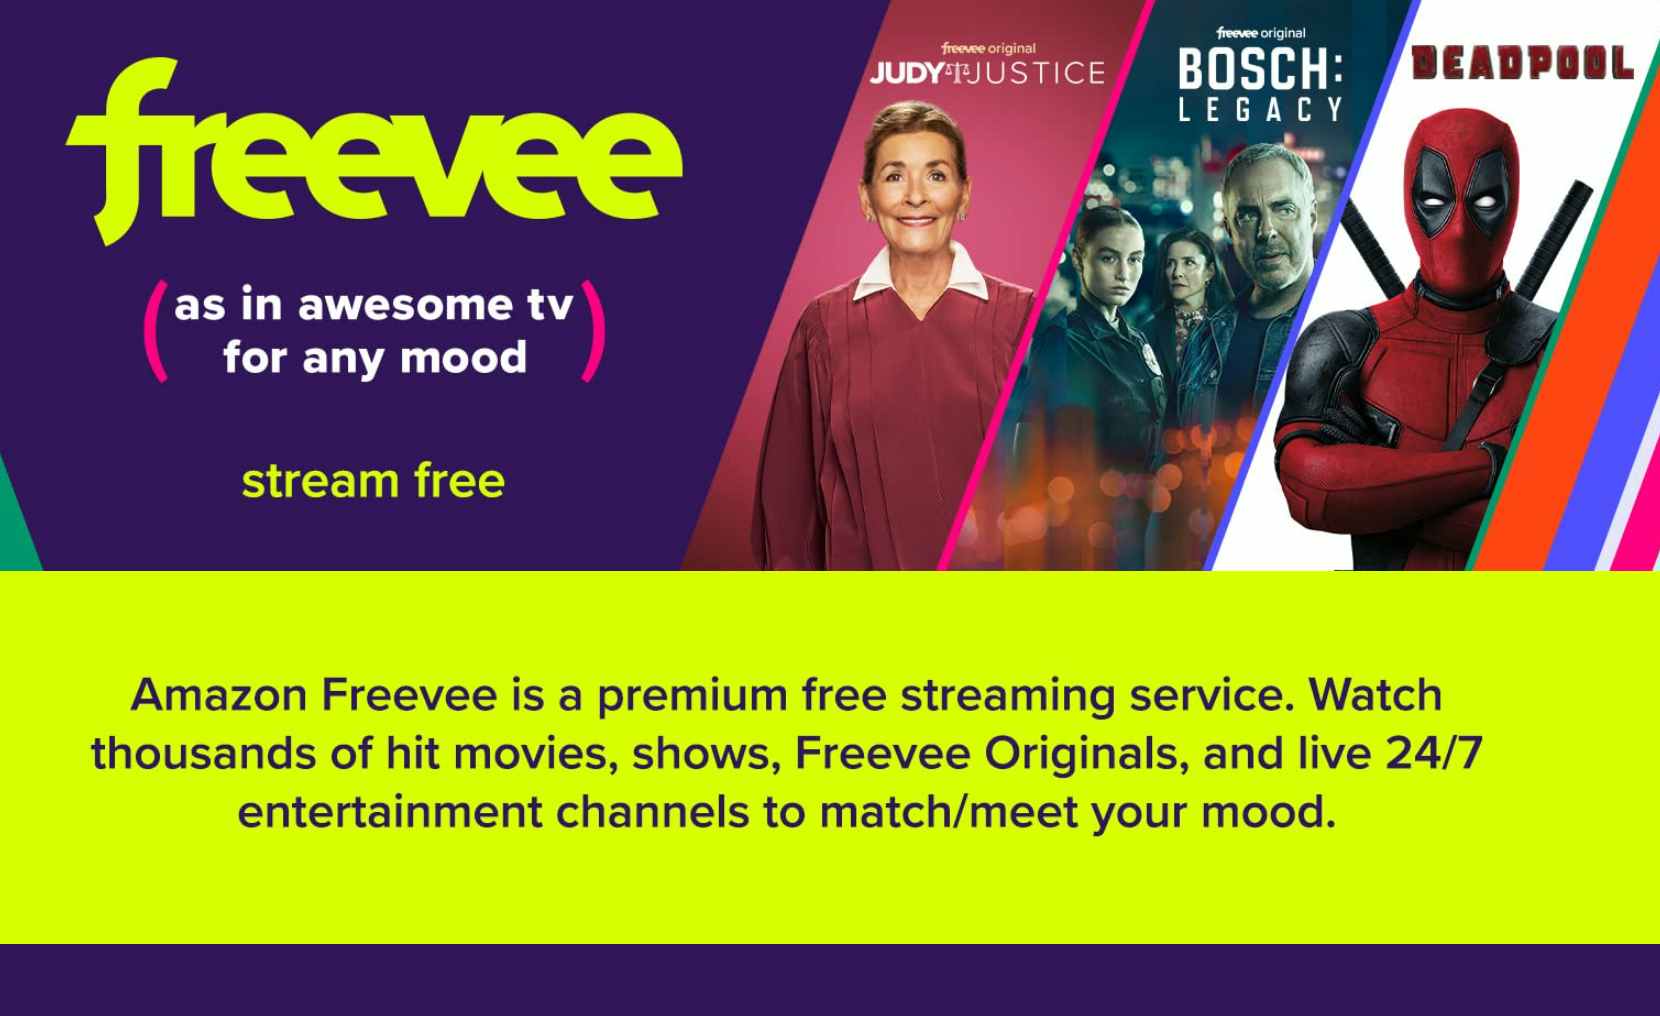 A screenshot from the Amazon Freevee streaming service page on Amazon's website.